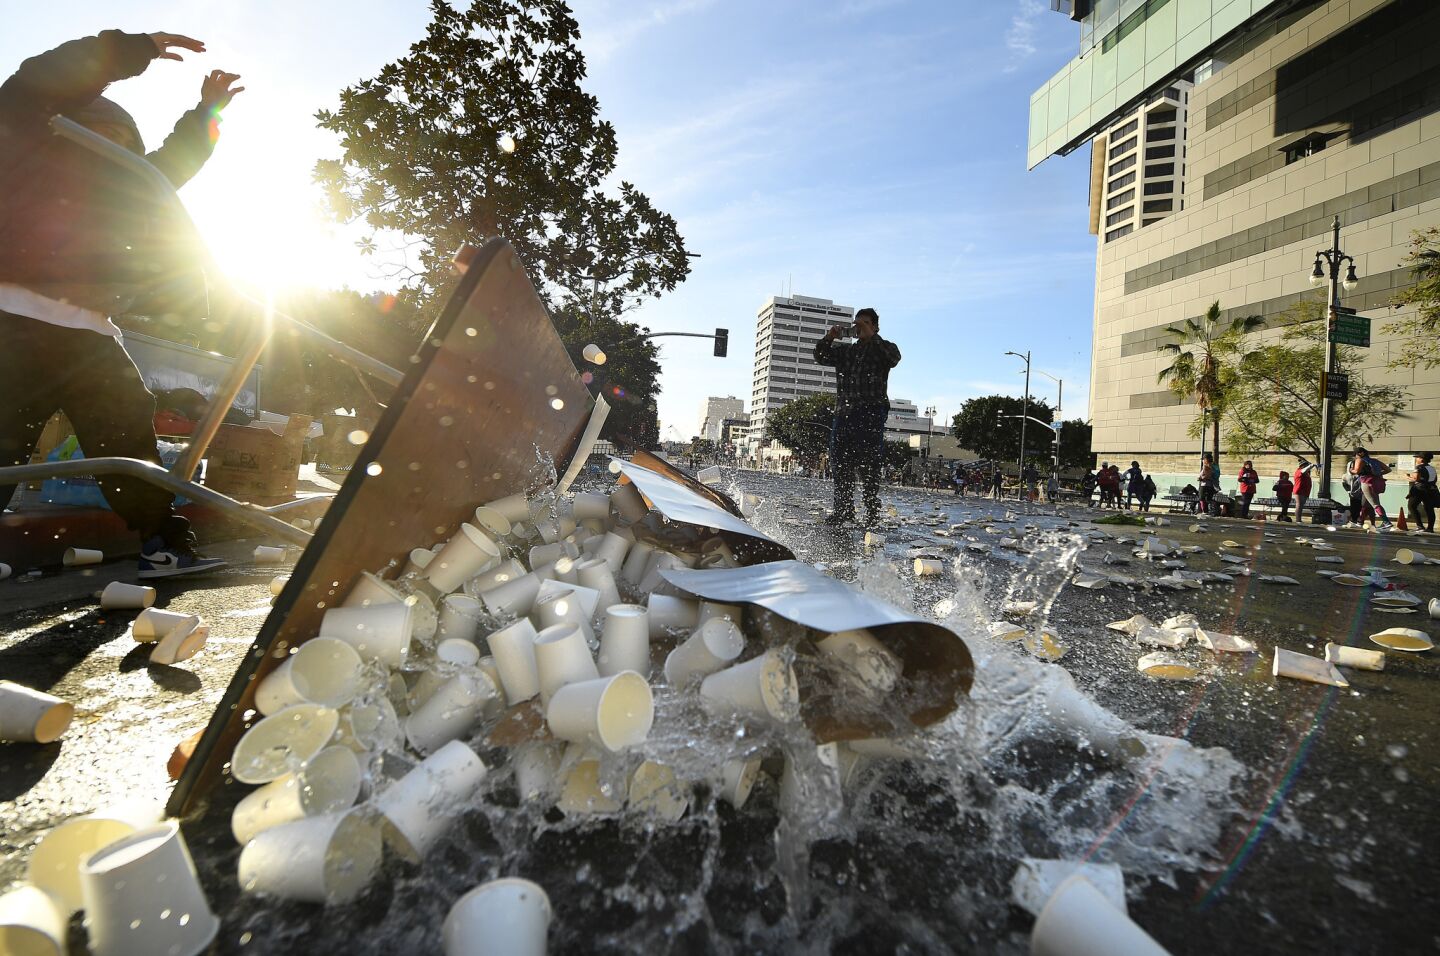 Water is dumped after the last runners pass by during the L.A. Marathon.